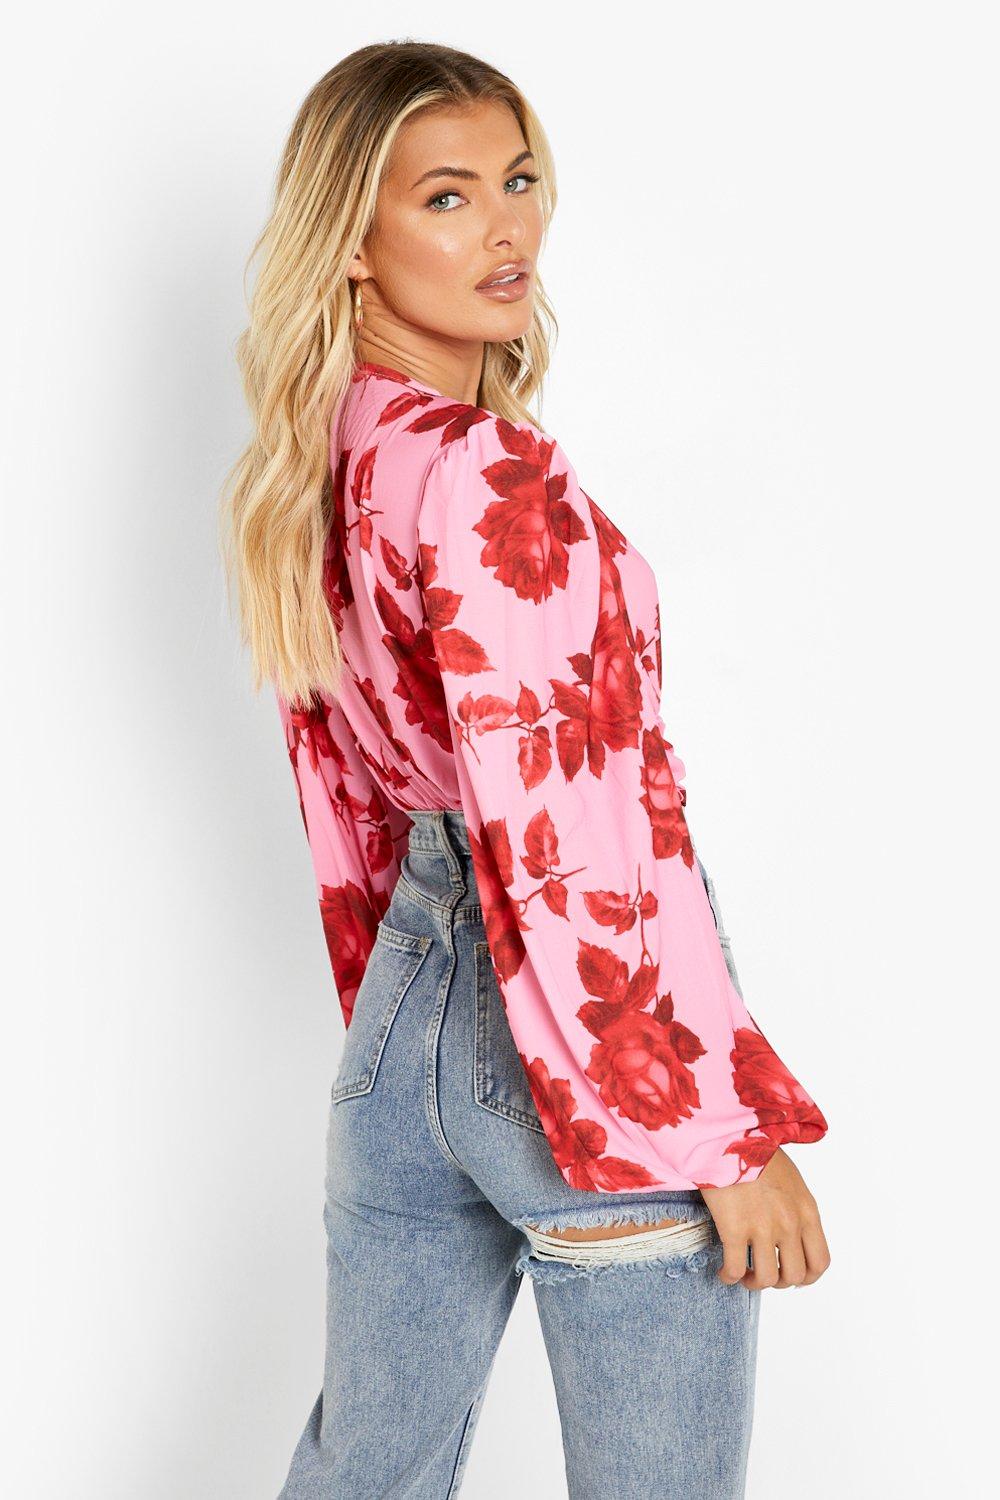 Boohoo Floral Bodysuit Great Offers